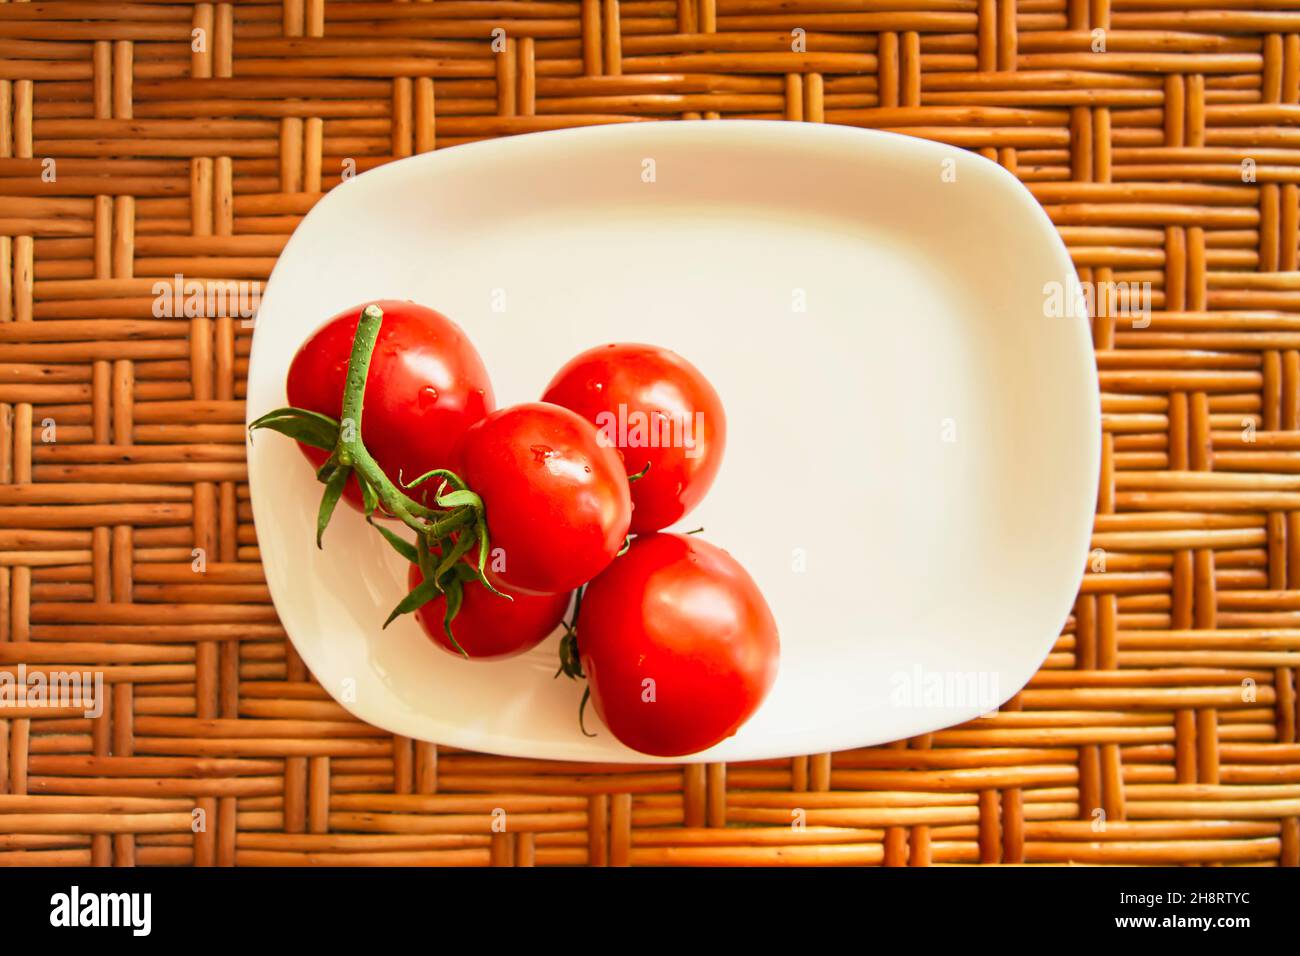 A cluster of red cherry tomatoes on a white flat rectangular plate stand on a wooden wicker surface. View from above. Horizontal photo. Life style composition. Close up. High quality photo Stock Photo